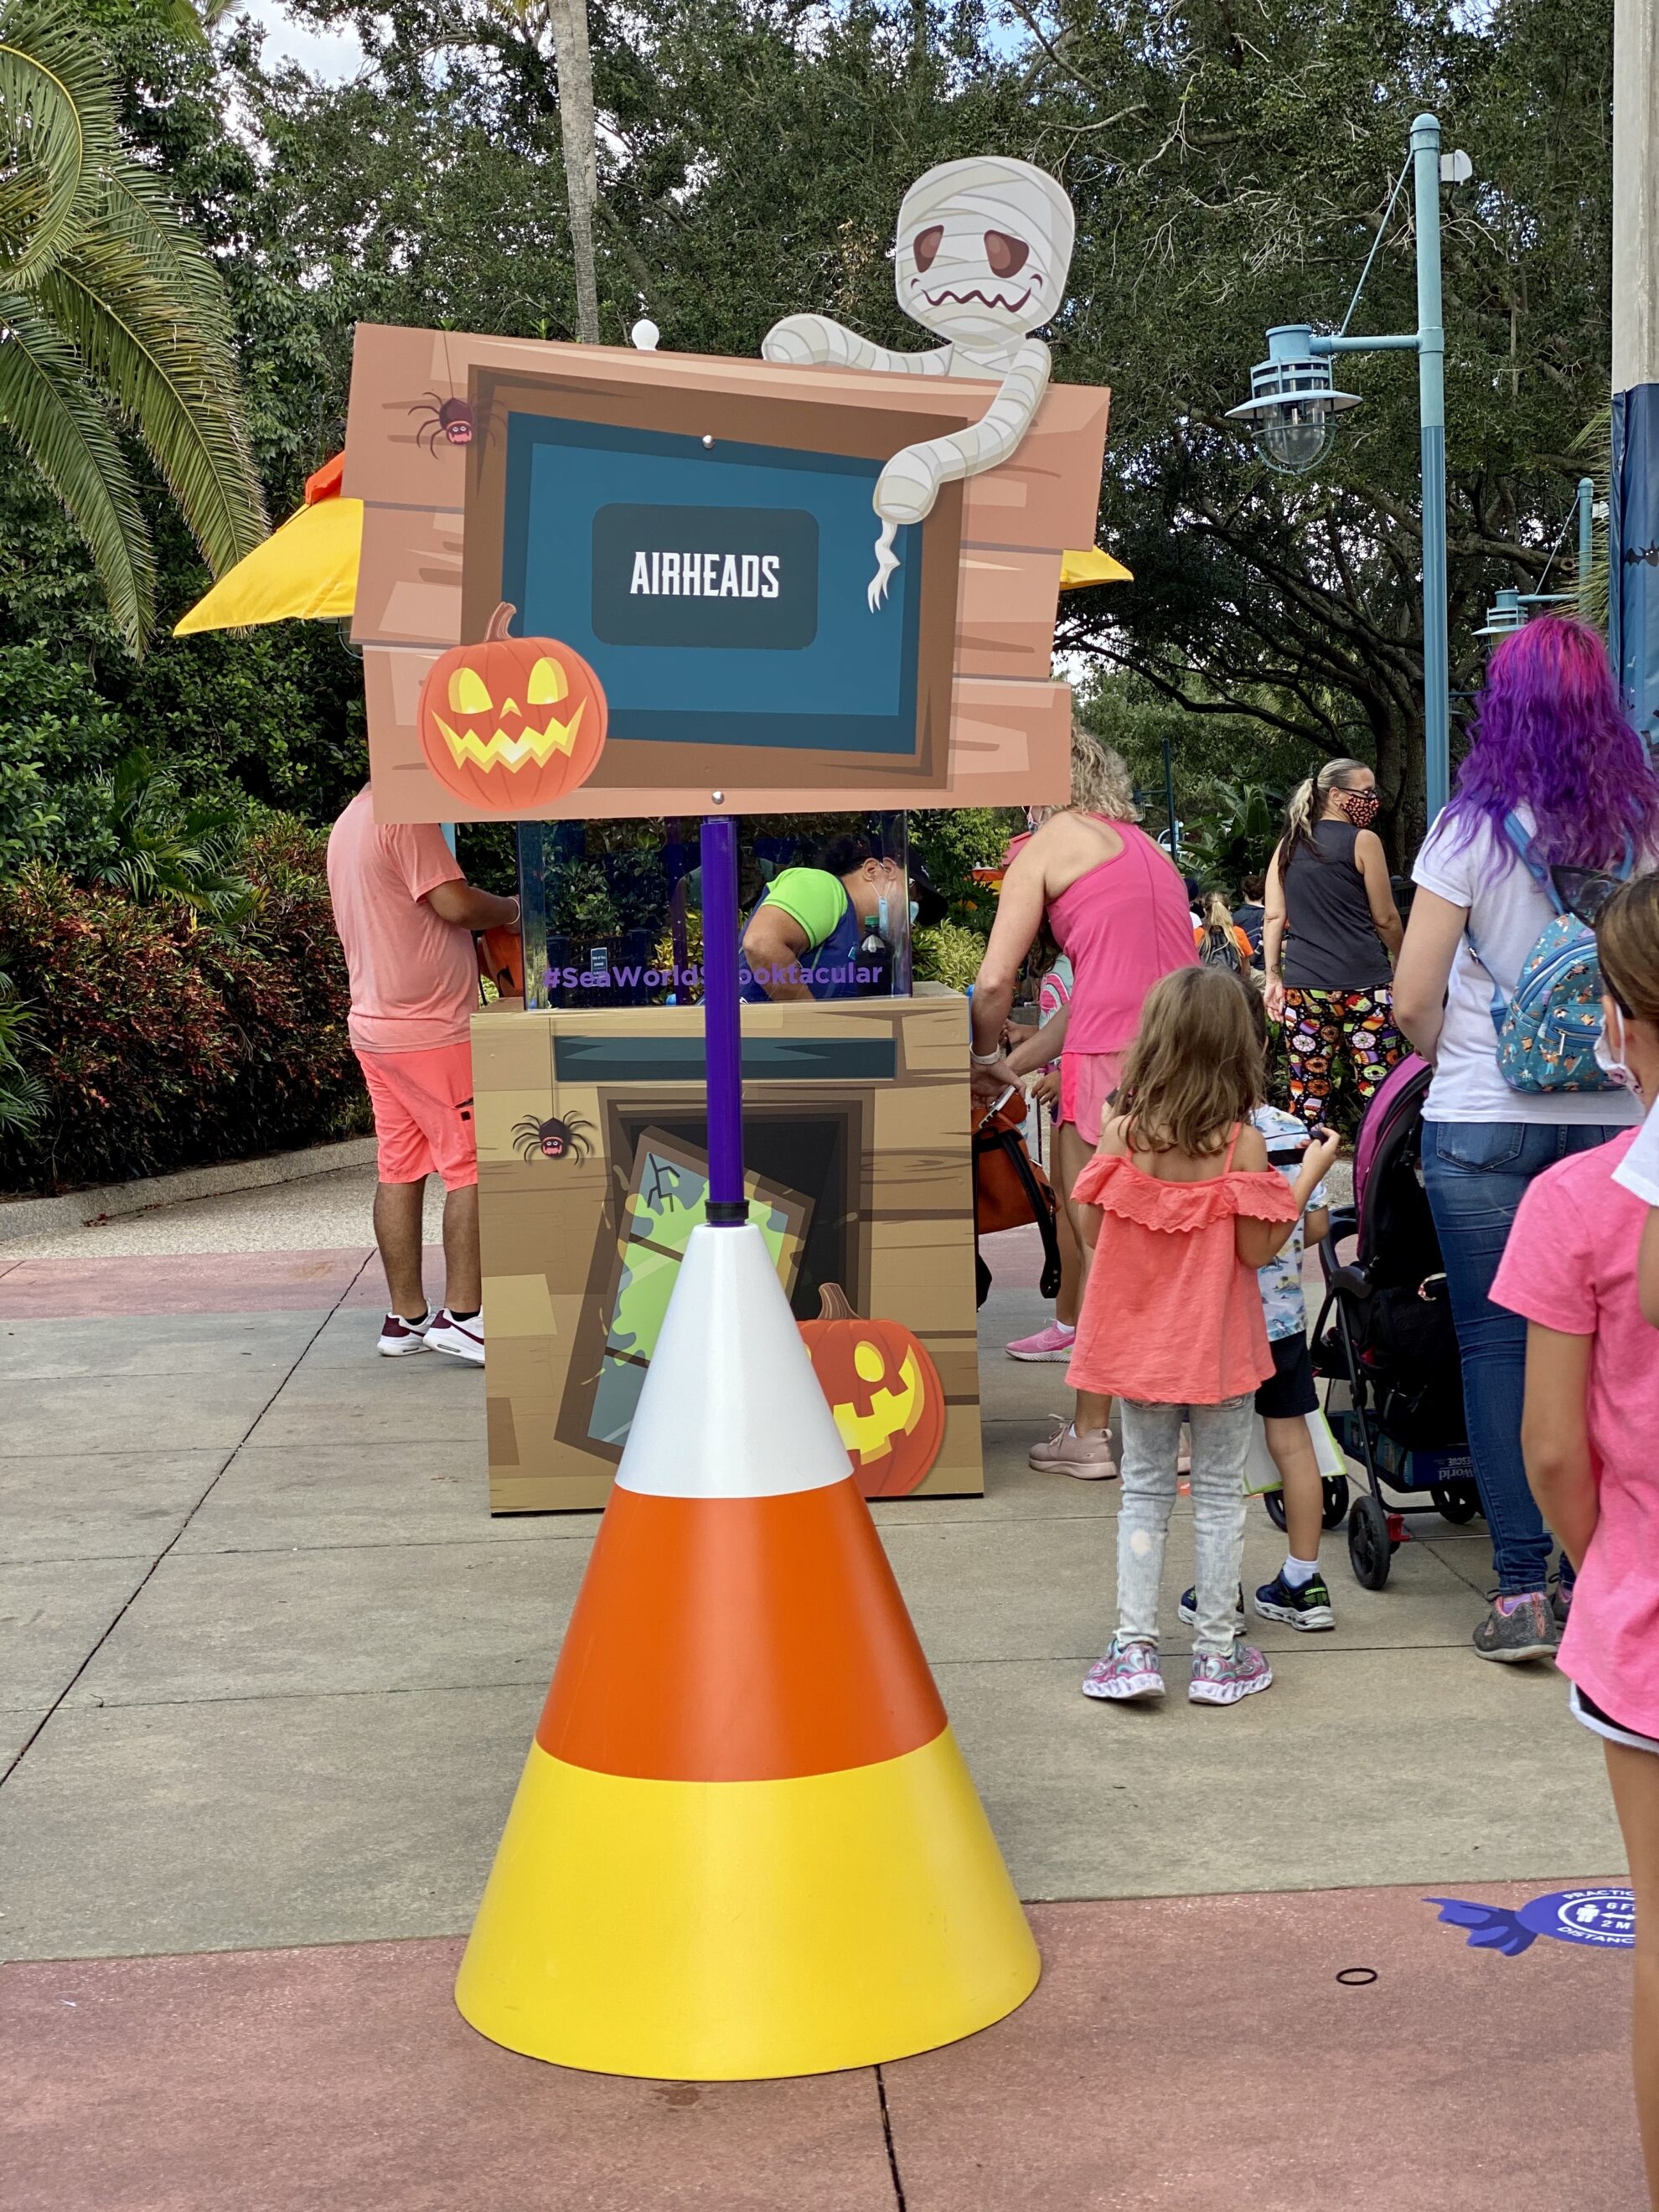 Candycorn large cone with sign that reads "airheads" at Trick or Treat station SeaWorld.